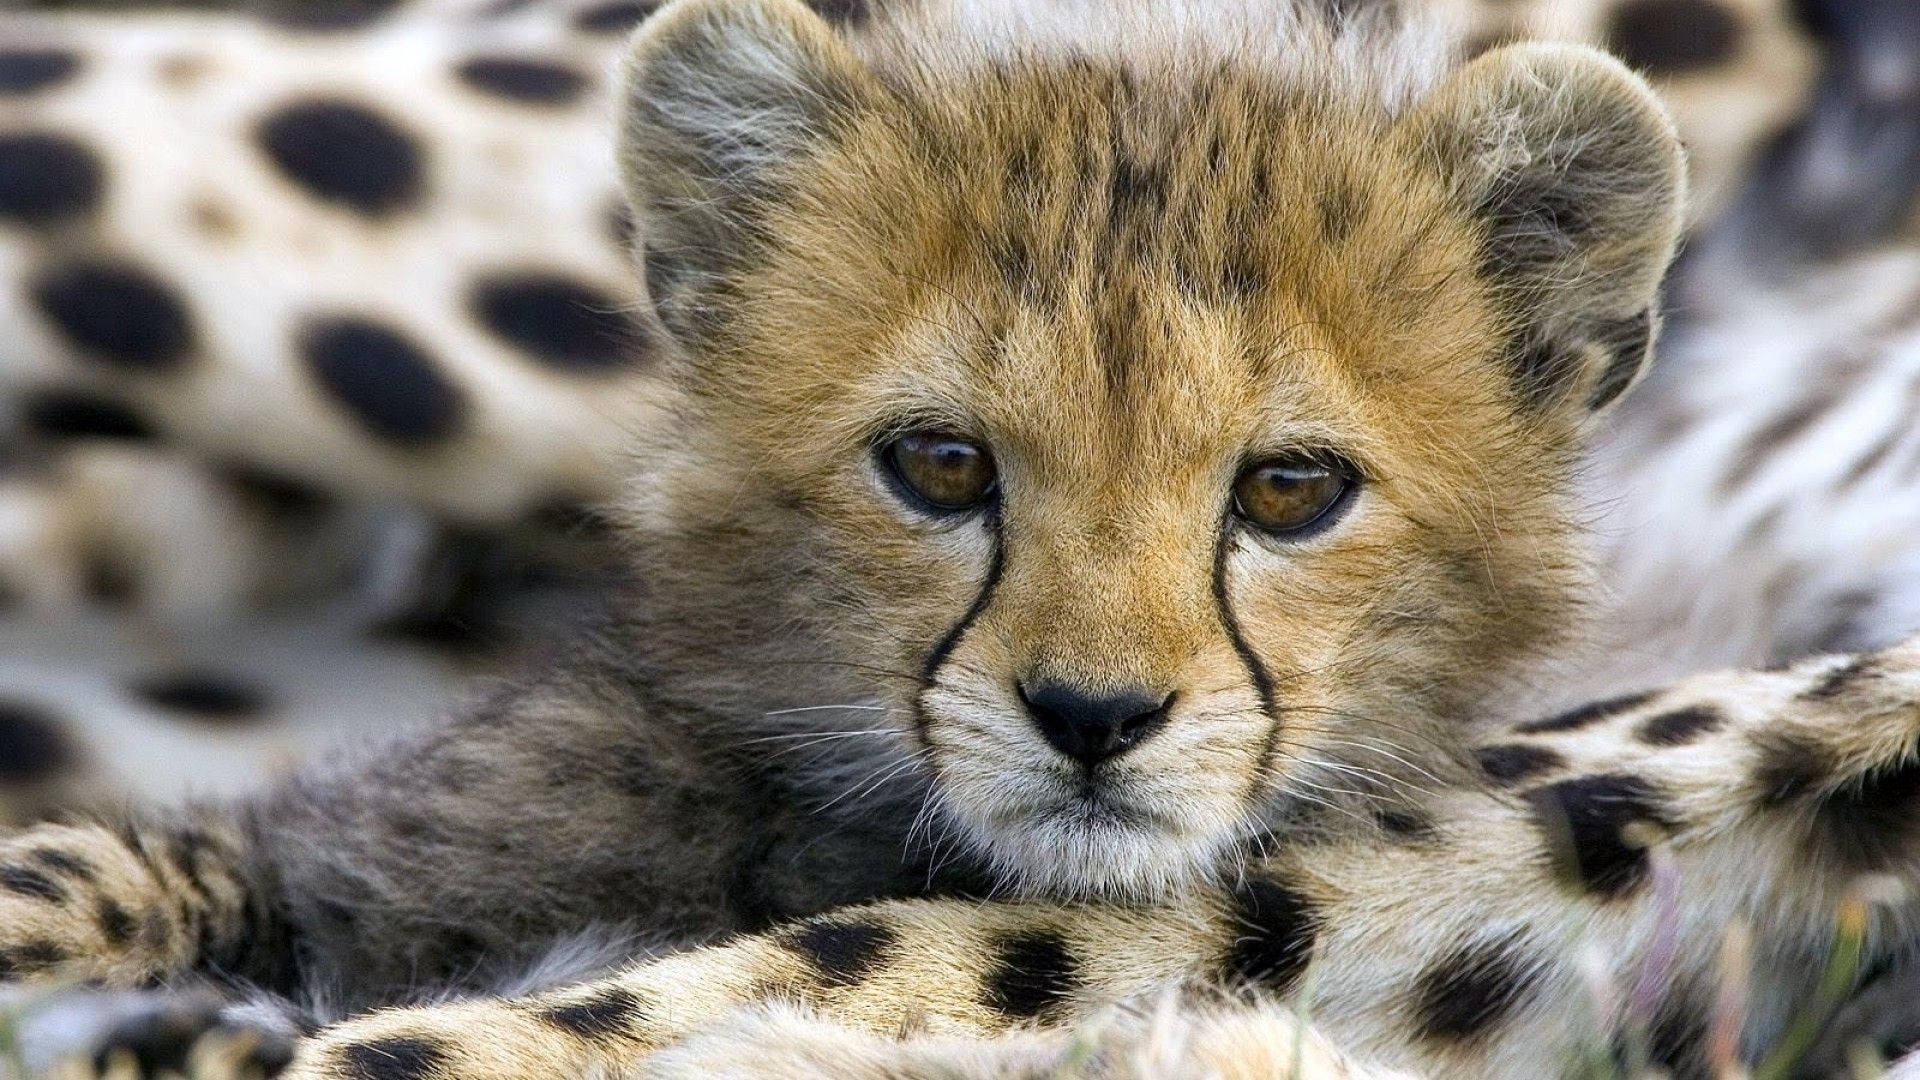 Endearing Baby Cheetah Background